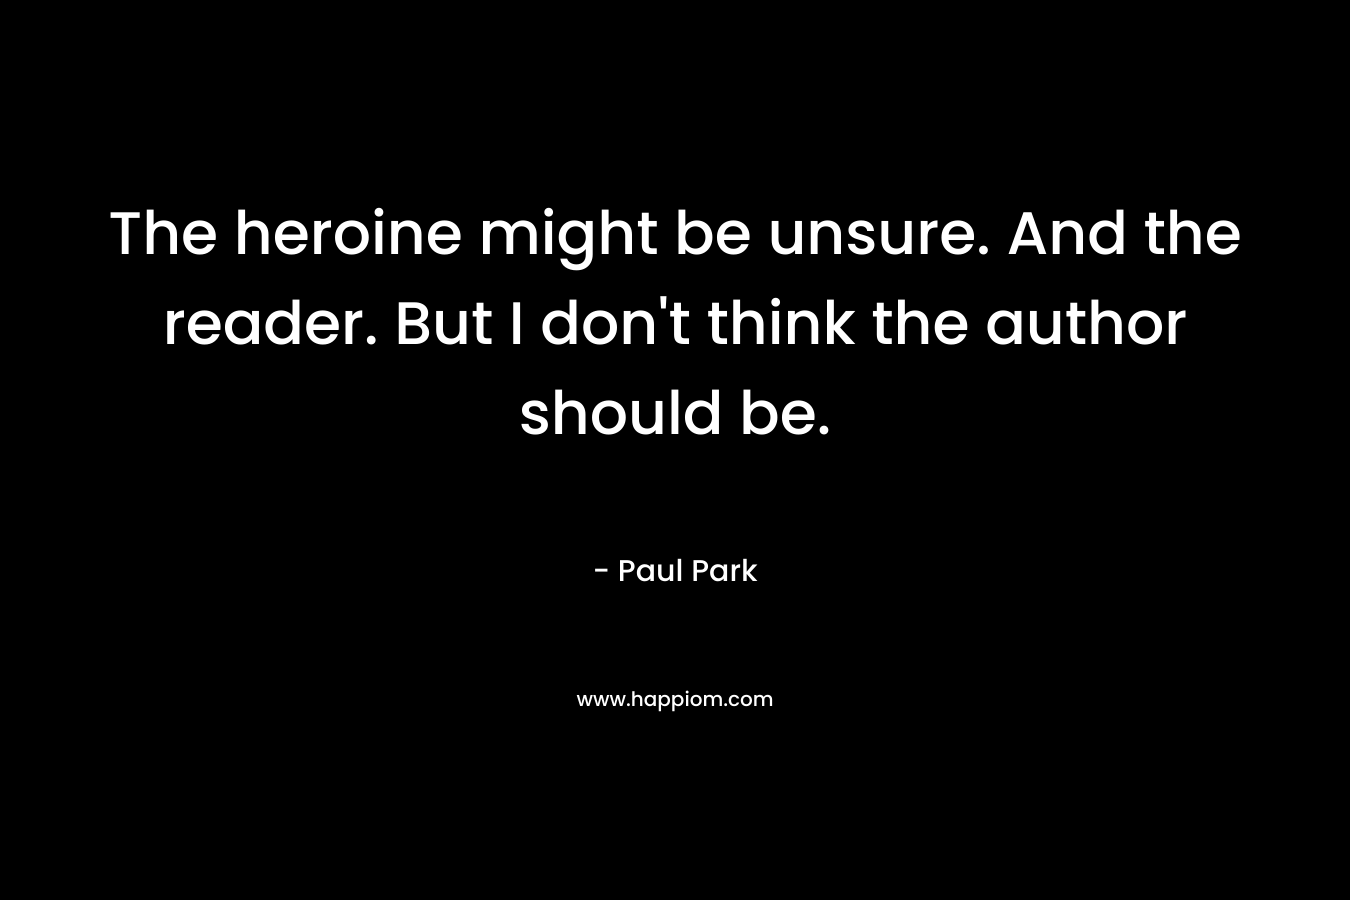 The heroine might be unsure. And the reader. But I don’t think the author should be. – Paul Park